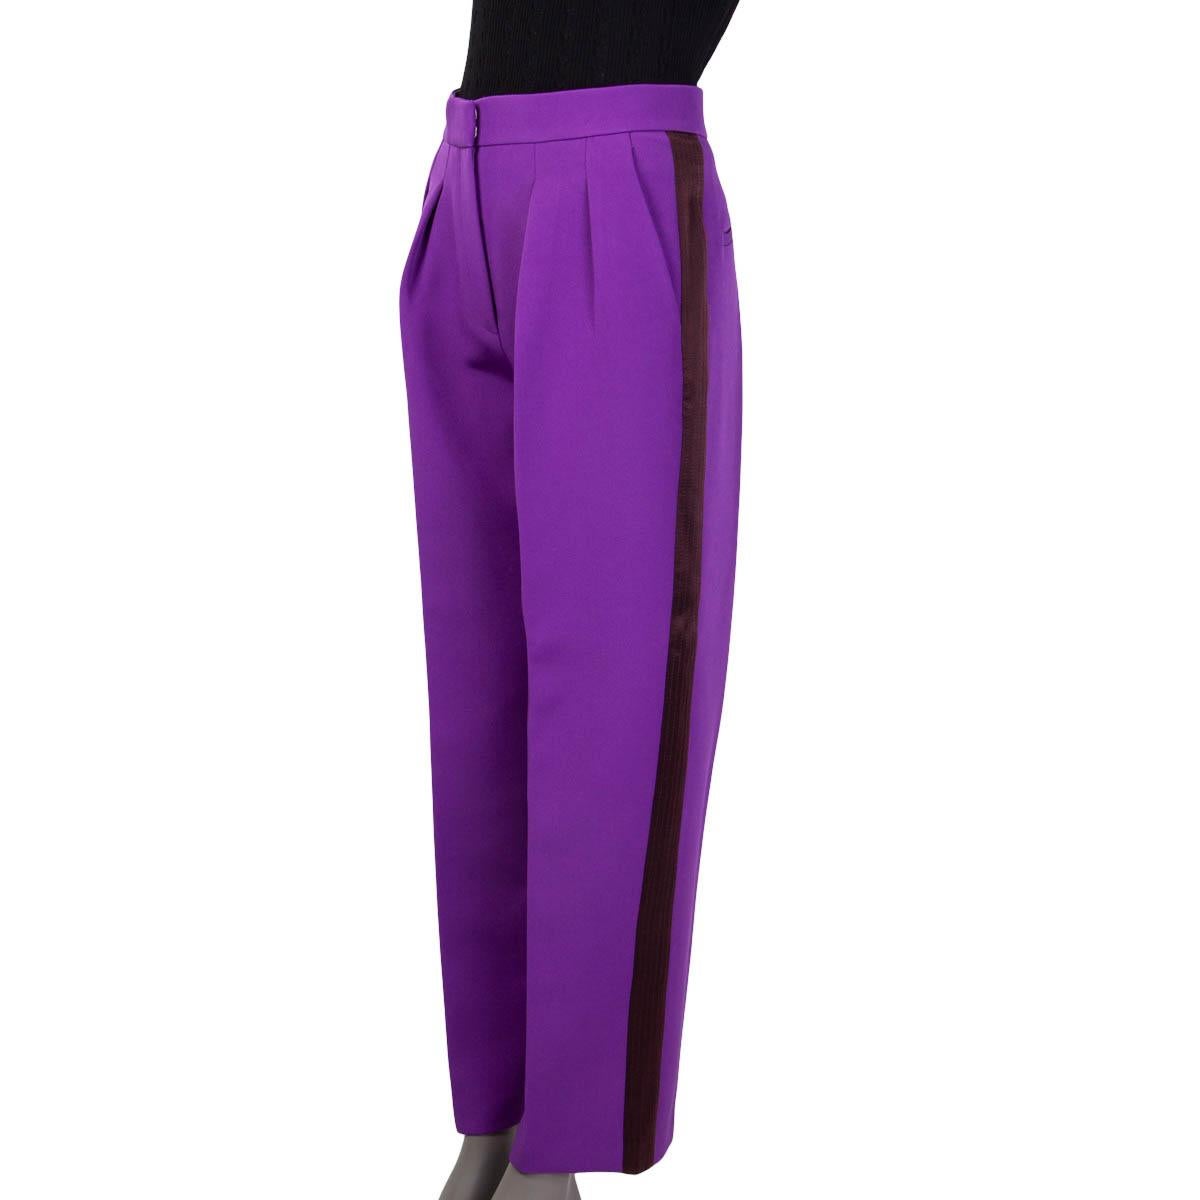 100% authentic Roksanda Resort 2019 Ricciarini pleated crepe pants in purple and eggplant polyester (67%), silk (25%), cotton (6%) and elastane (2%). Feature a satin trim, two slit pockets on the front and two slit pockets on the back. Open with a